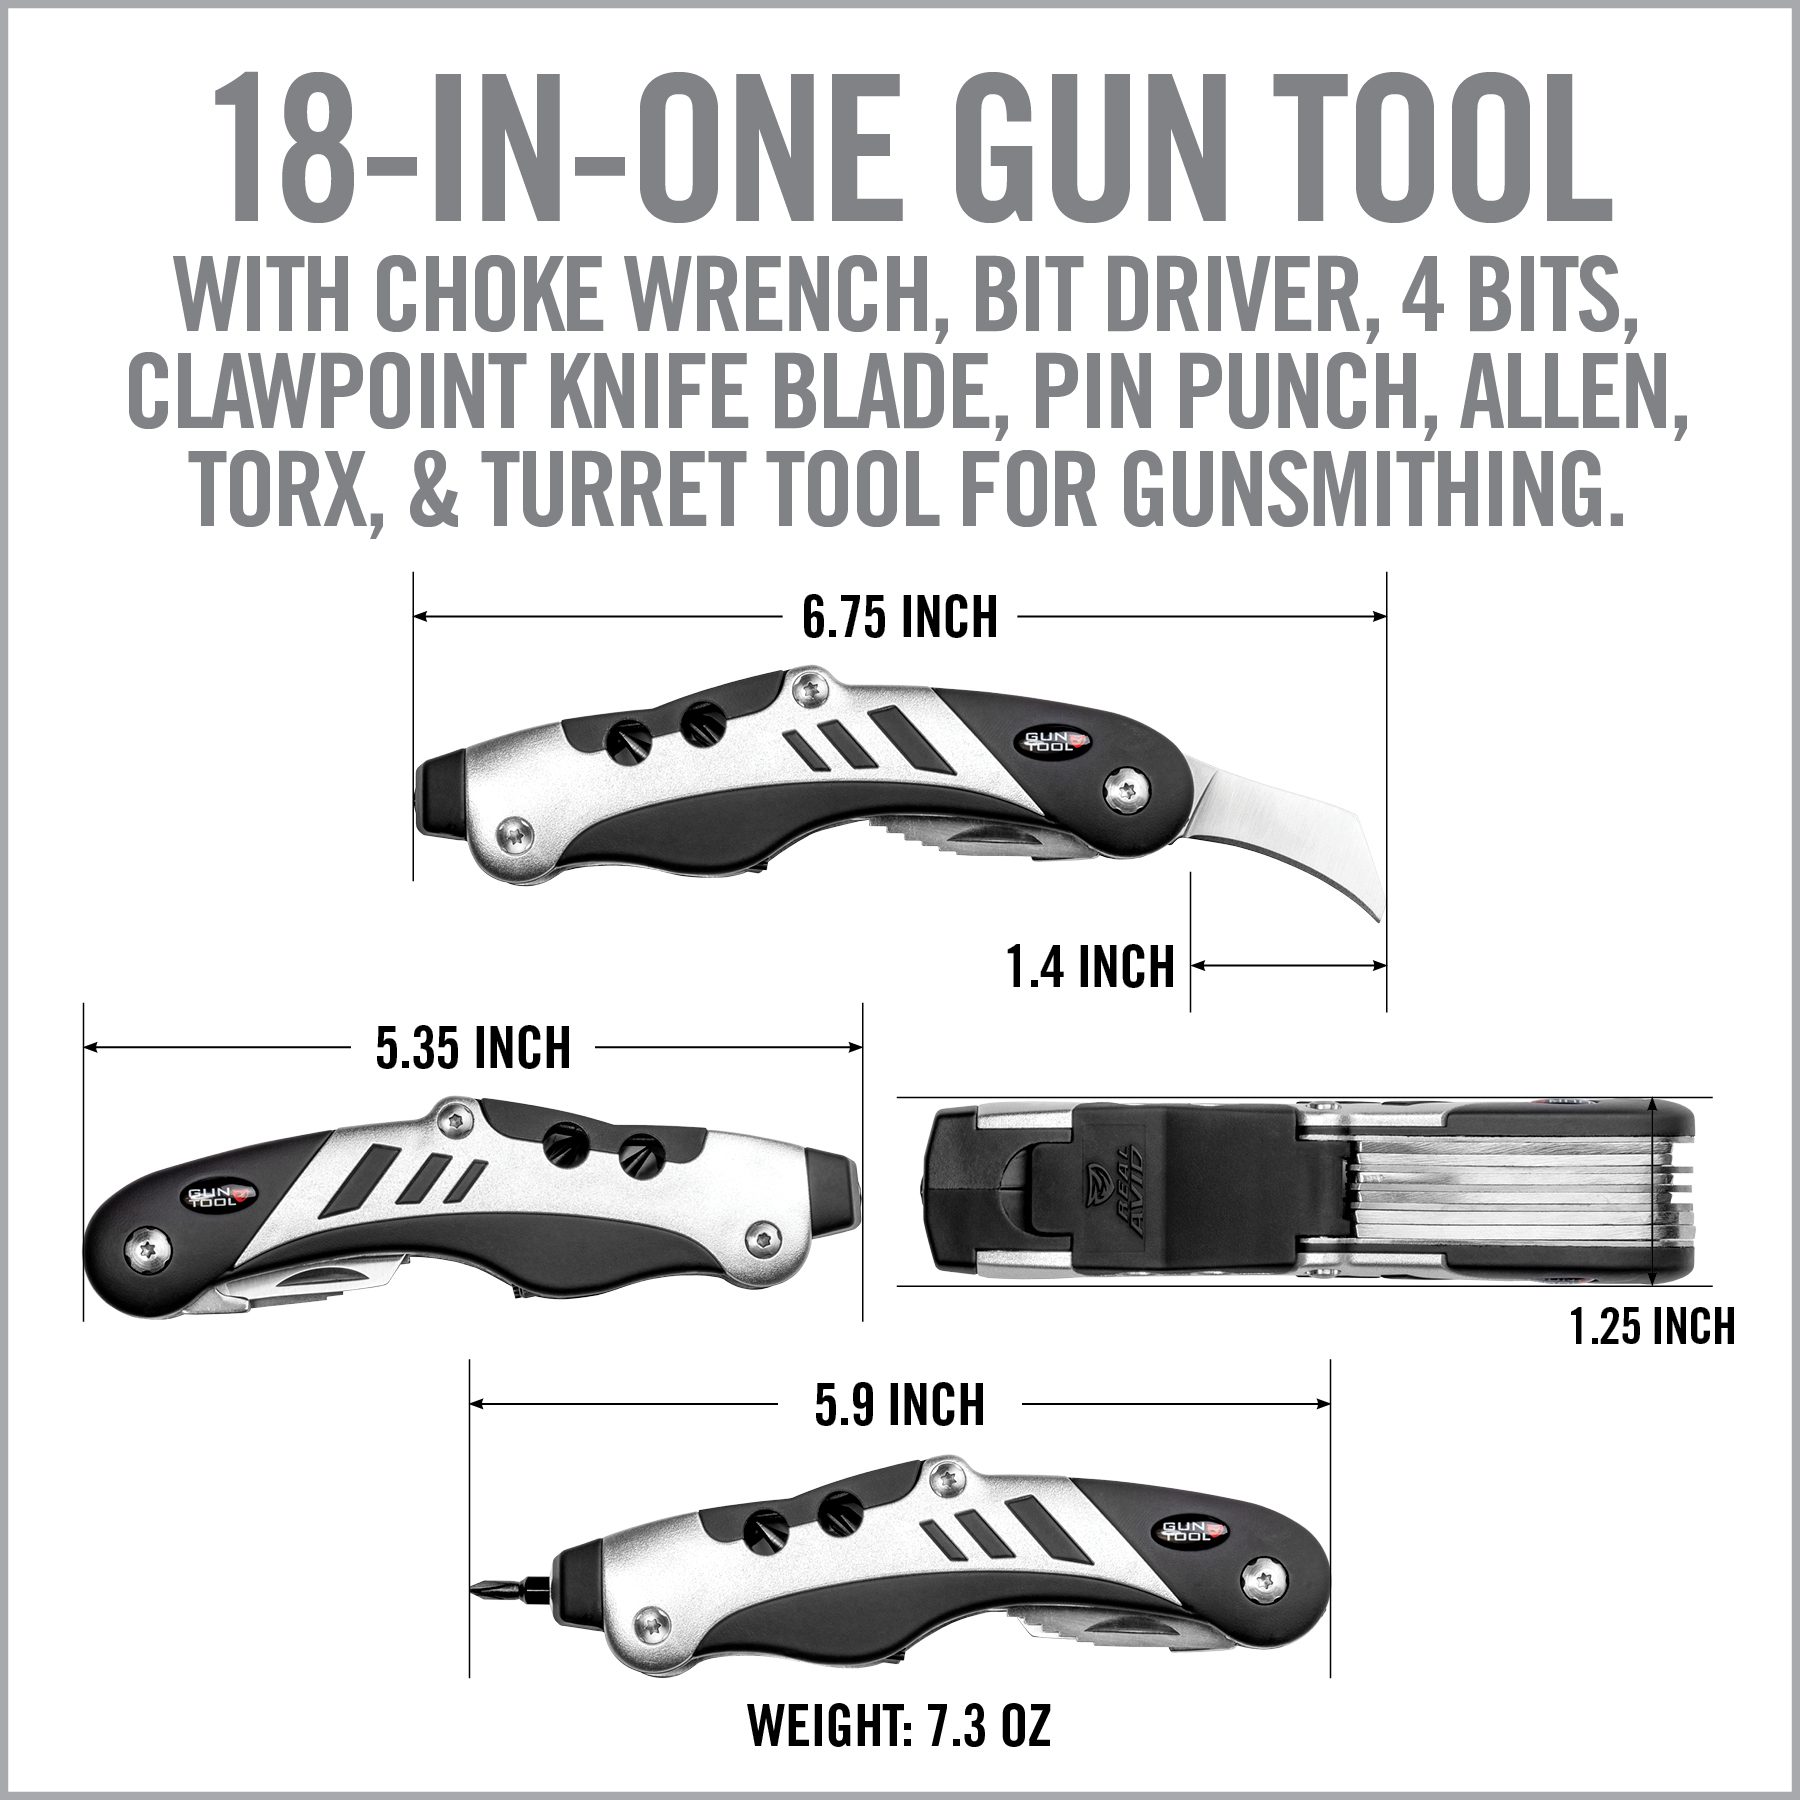 a diagram showing the different types of knifes